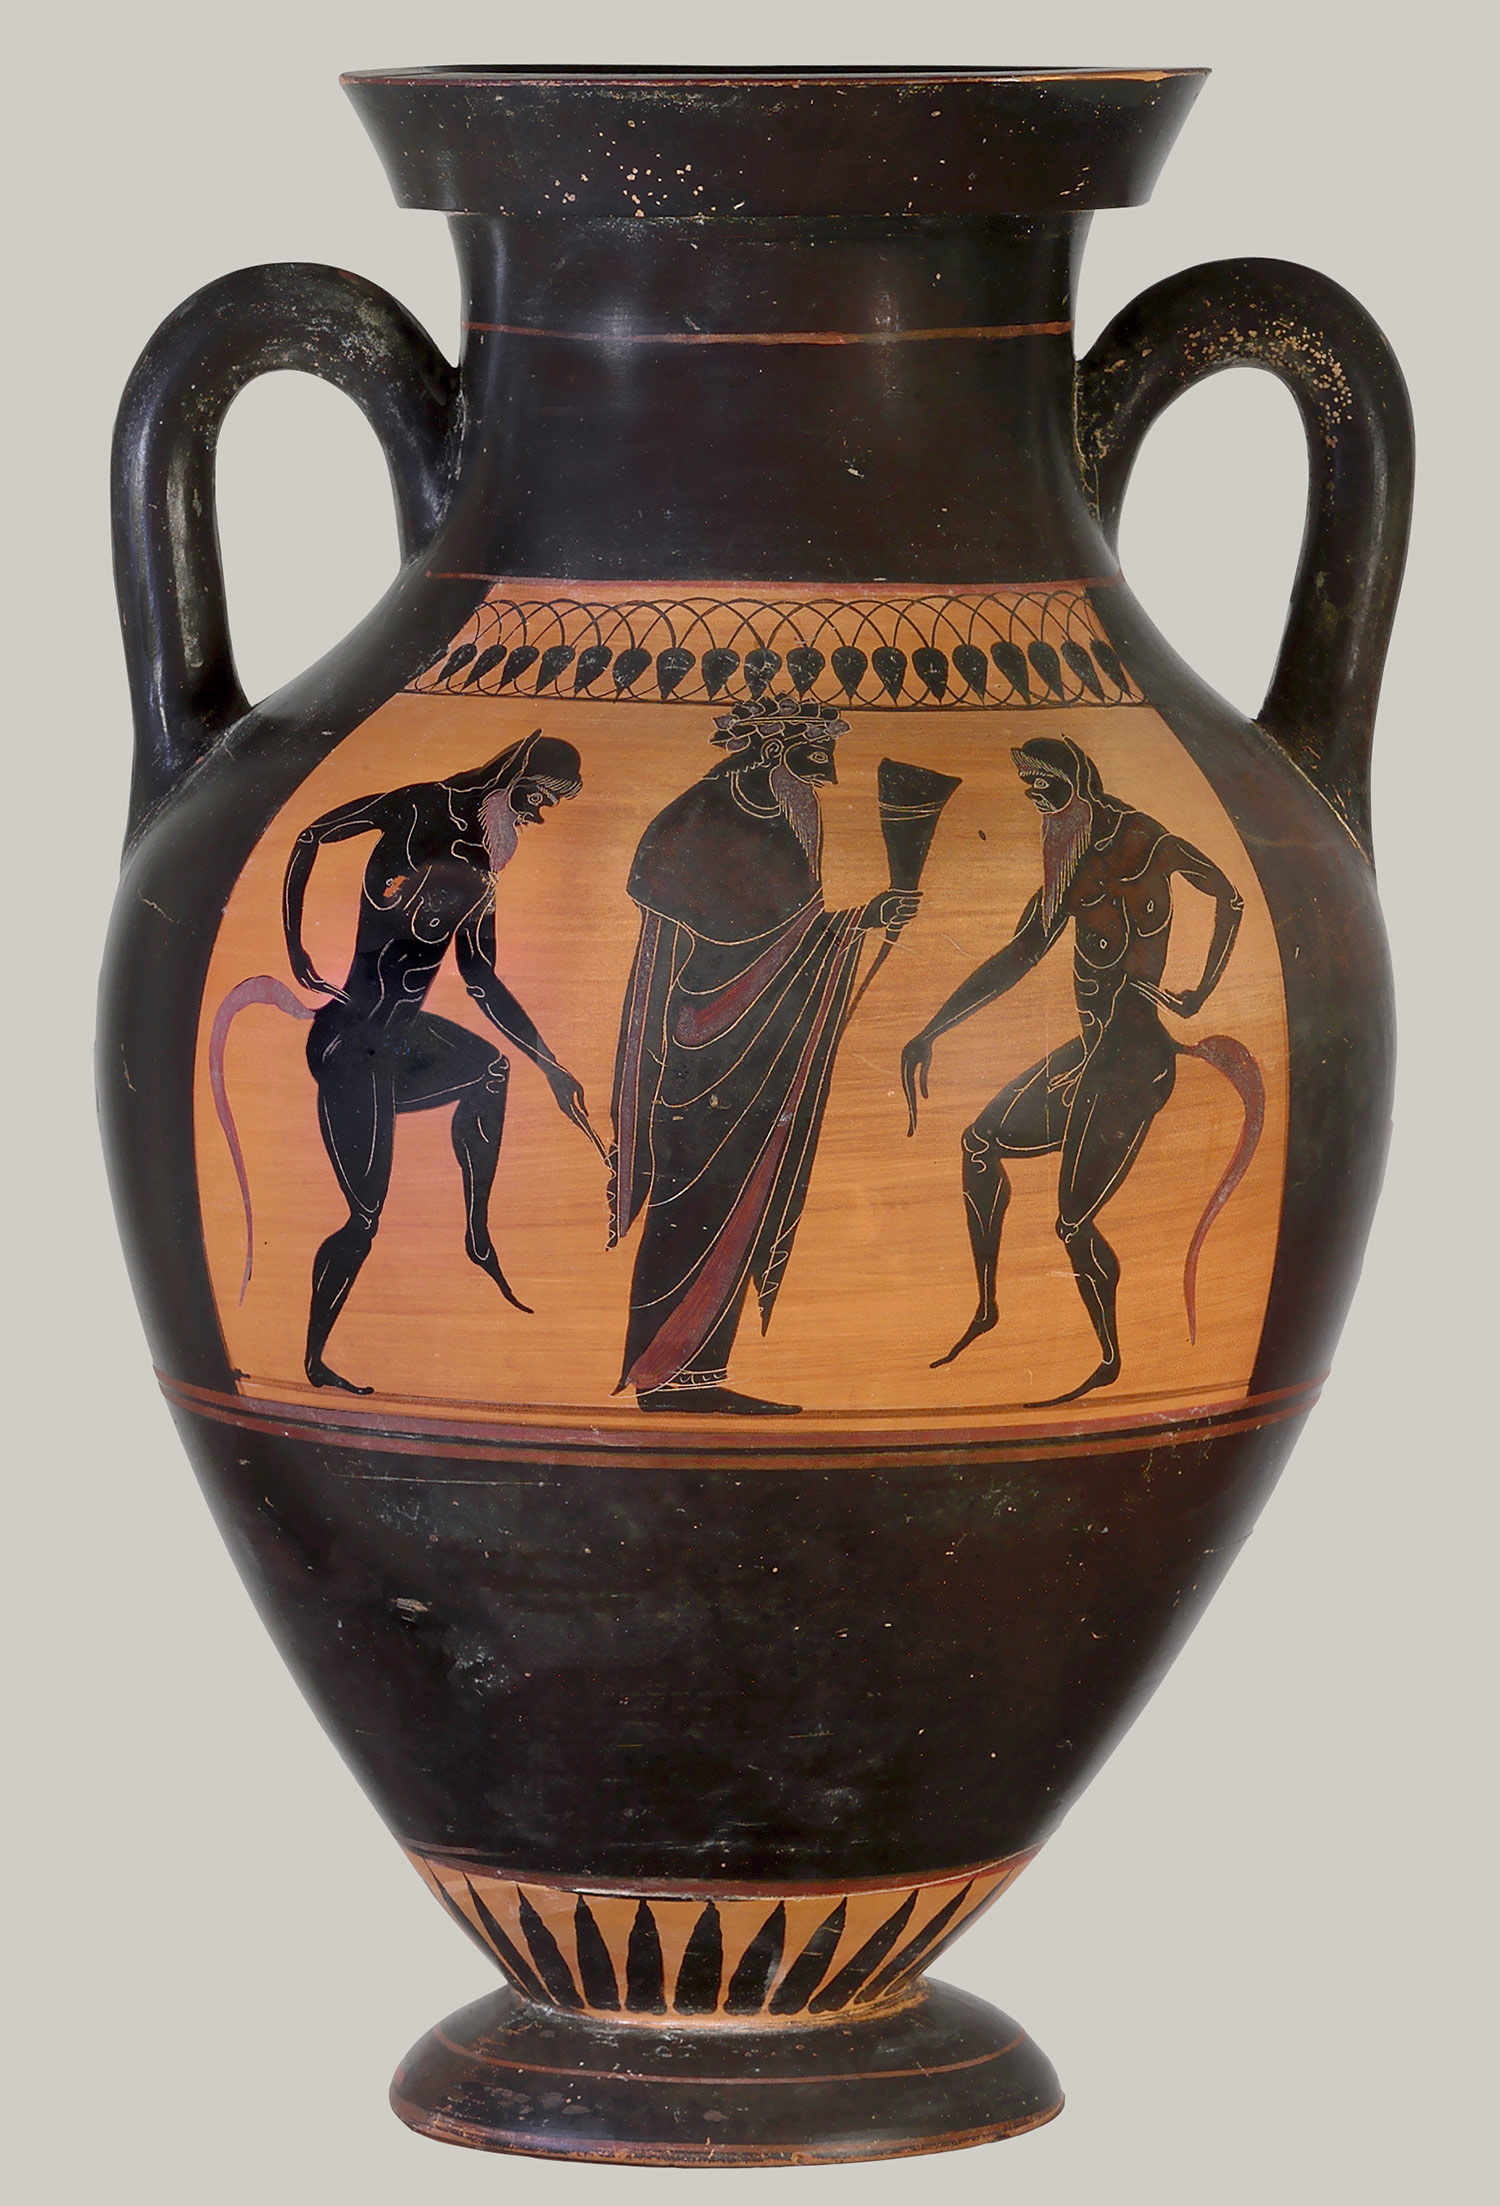 Scenes of Everyday Life in Ancient Greece | Thematic Essay | Heilbrunn